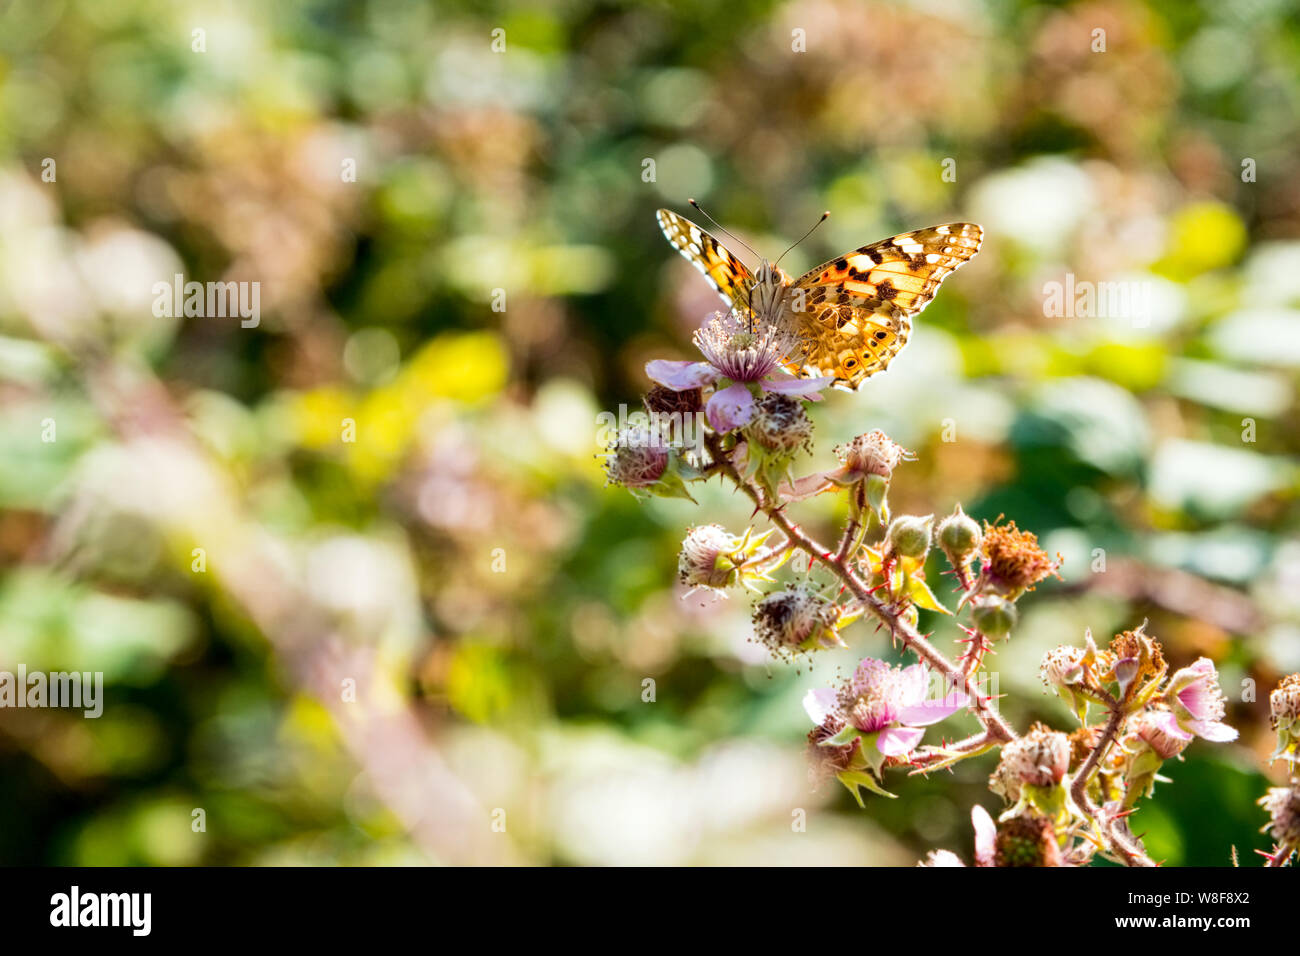 Vanessa cardui, or Painted Lady butterfly on bramble flowers, Wales Stock Photo